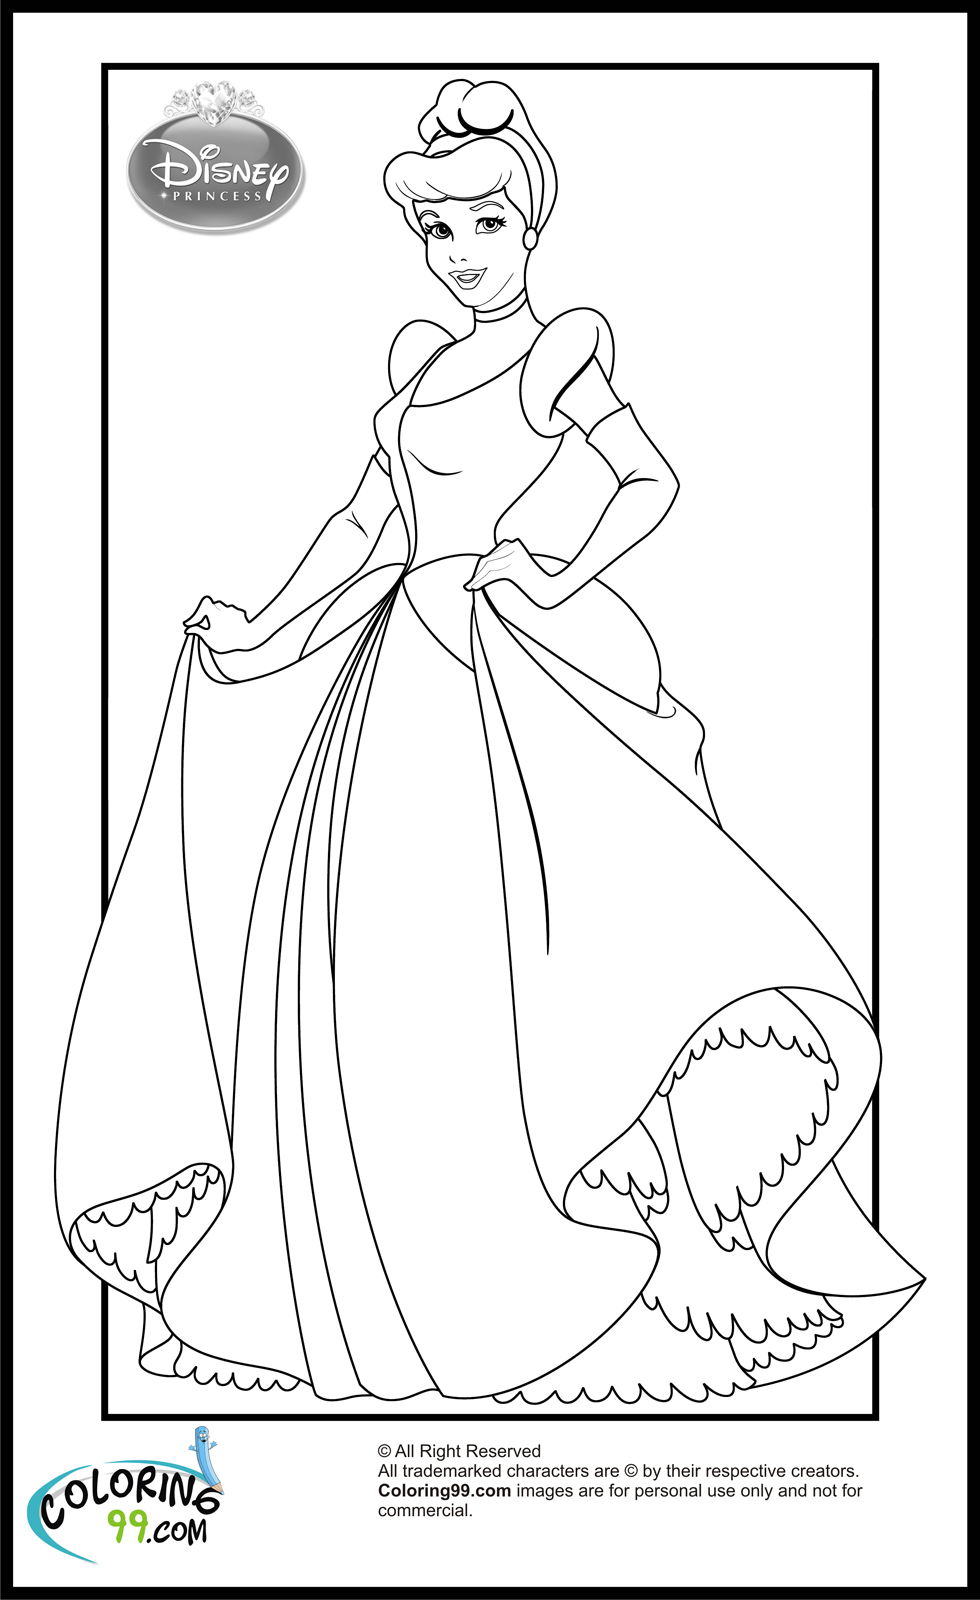 Disney Princess Cinderella Coloring Pages Team Colors BEDECOR Free Coloring Picture wallpaper give a chance to color on the wall without getting in trouble! Fill the walls of your home or office with stress-relieving [bedroomdecorz.blogspot.com]